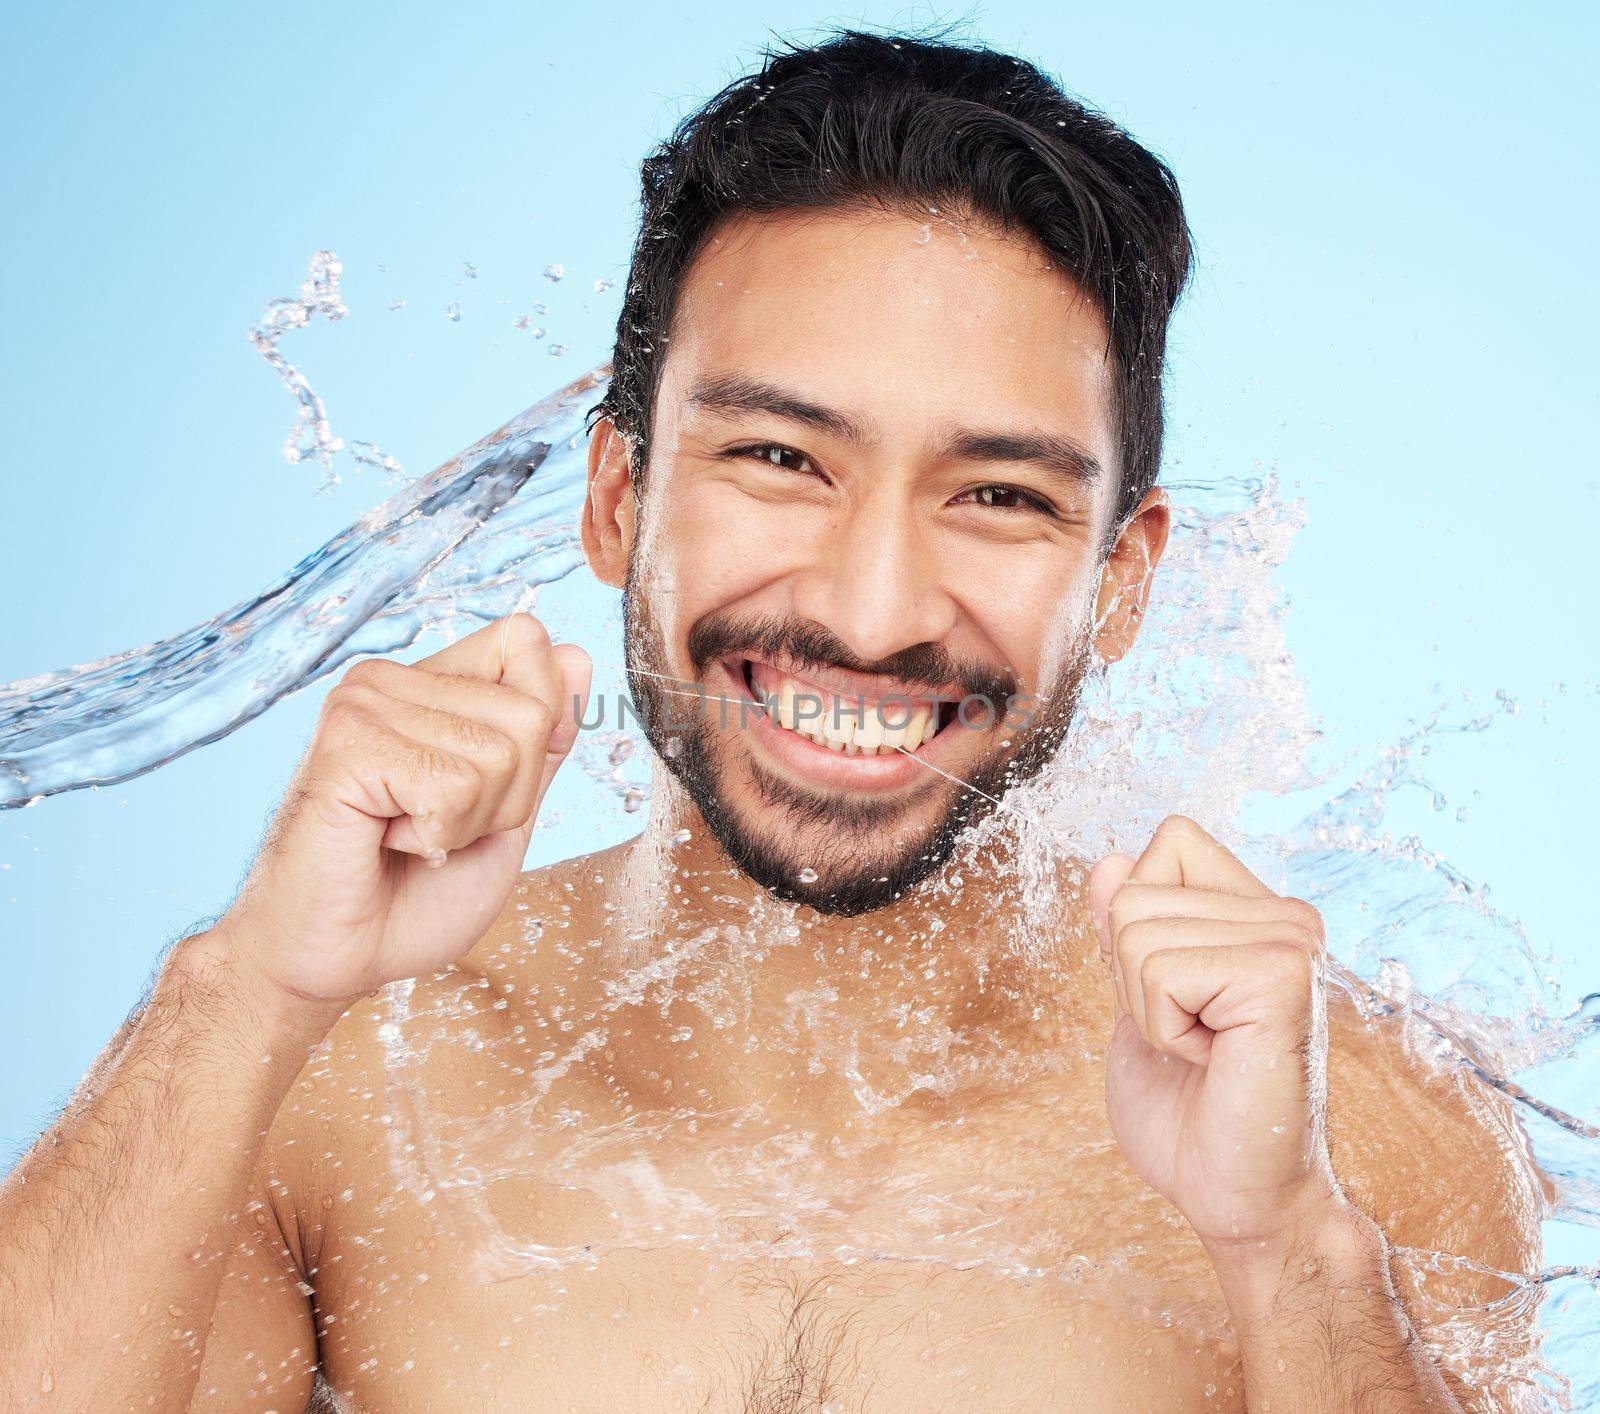 Dental, teeth floss and water splash with man in portrait for hygiene, cleaning and oral healthcare against studio background. Teeth whitening, clean mouth and fresh breath with smile and Invisalign by YuriArcurs